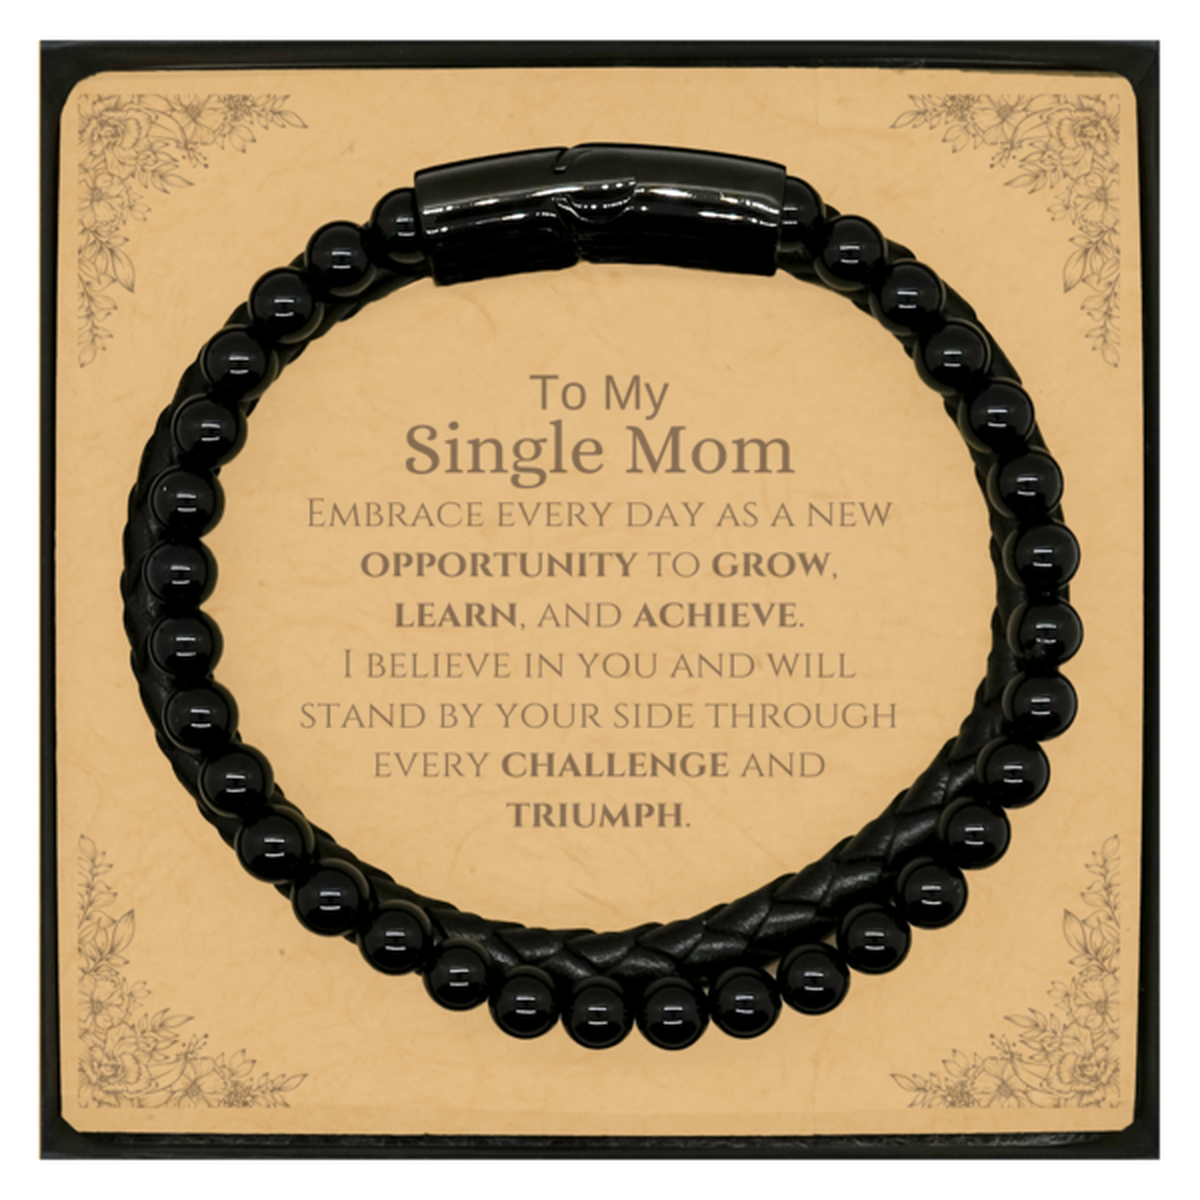 To My Single Mom Gifts, I believe in you and will stand by your side, Inspirational Stone Leather Bracelets For Single Mom, Birthday Christmas Motivational Single Mom Gifts